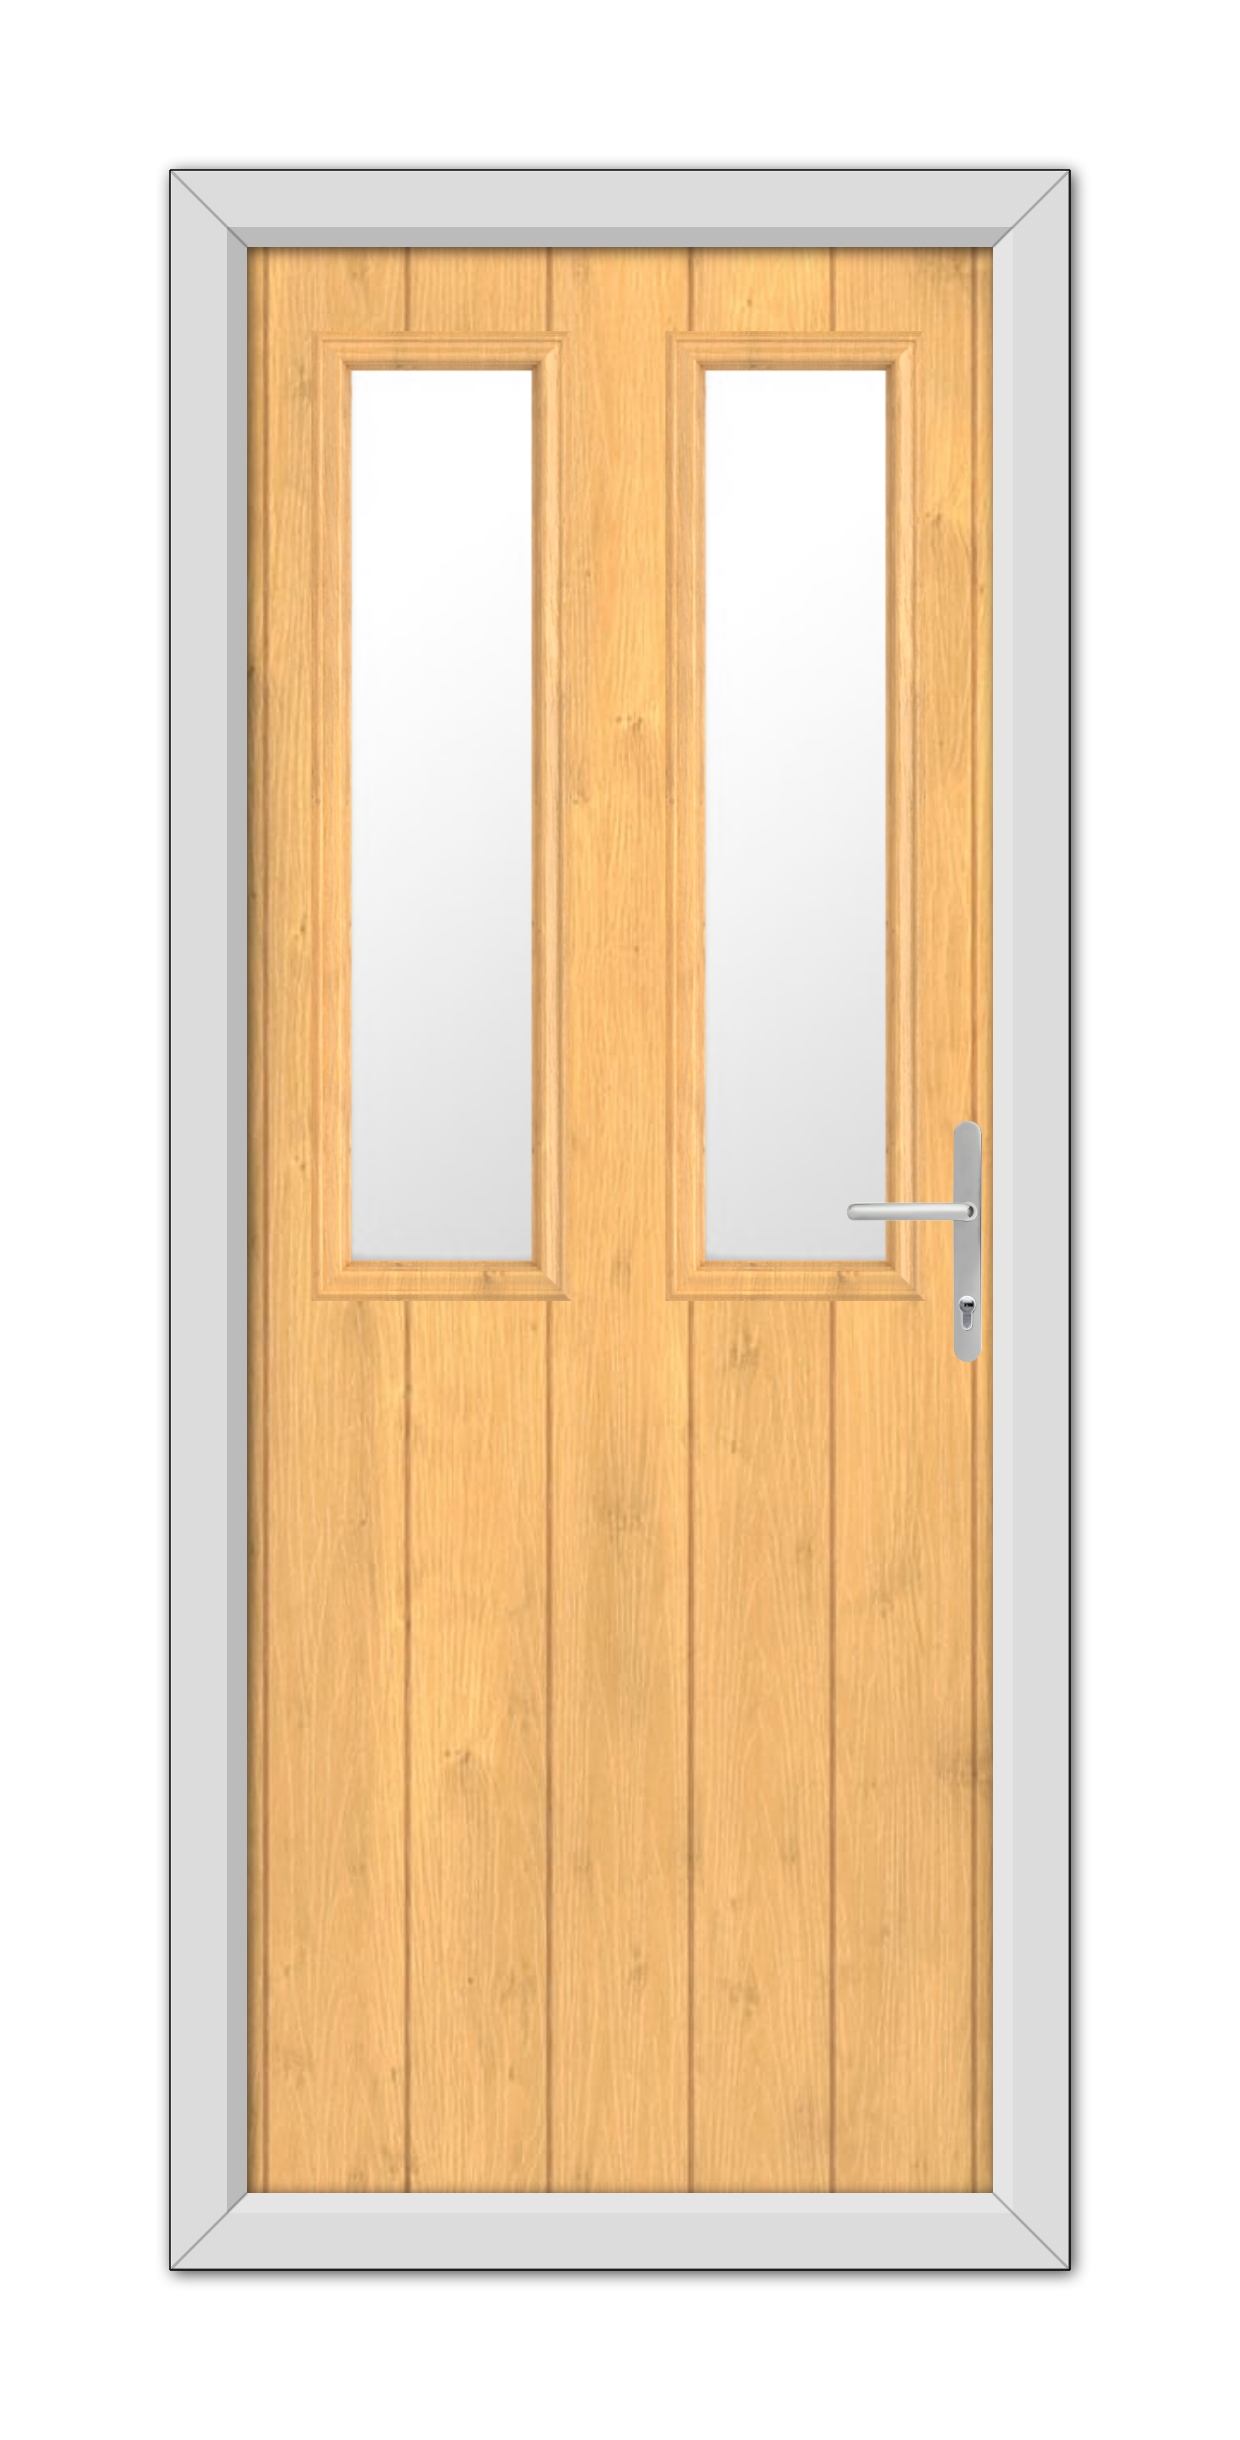 Irish Oak Wellington Composite Door 48mm Timber Core with glass panels, framed in gray, featuring a modern handle on the right door.